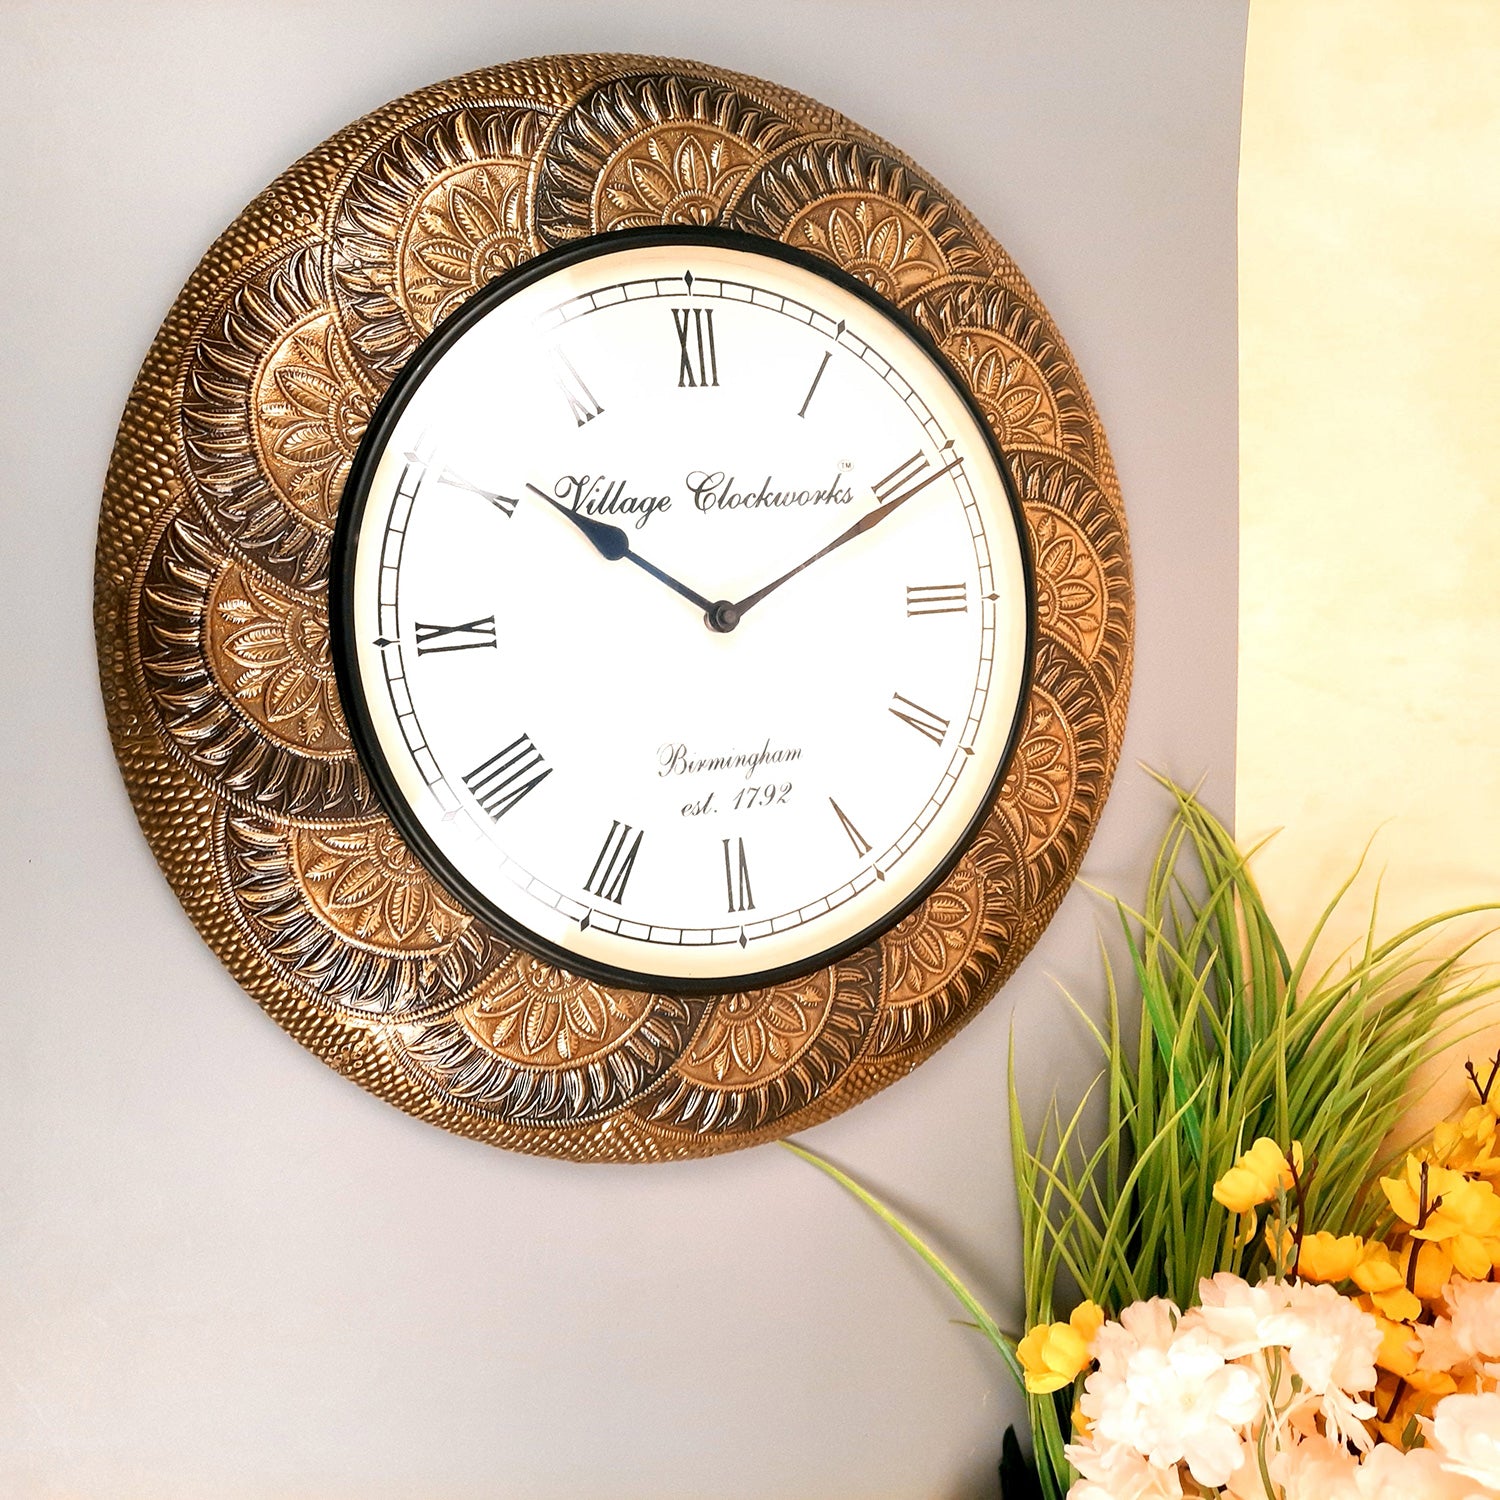 Wall Clock for Home | Wall Mount Analogue Clock Antique With Roman Numbers - For Living Room, Bedroom, Hall, Office Decor & Gift - Apkamart